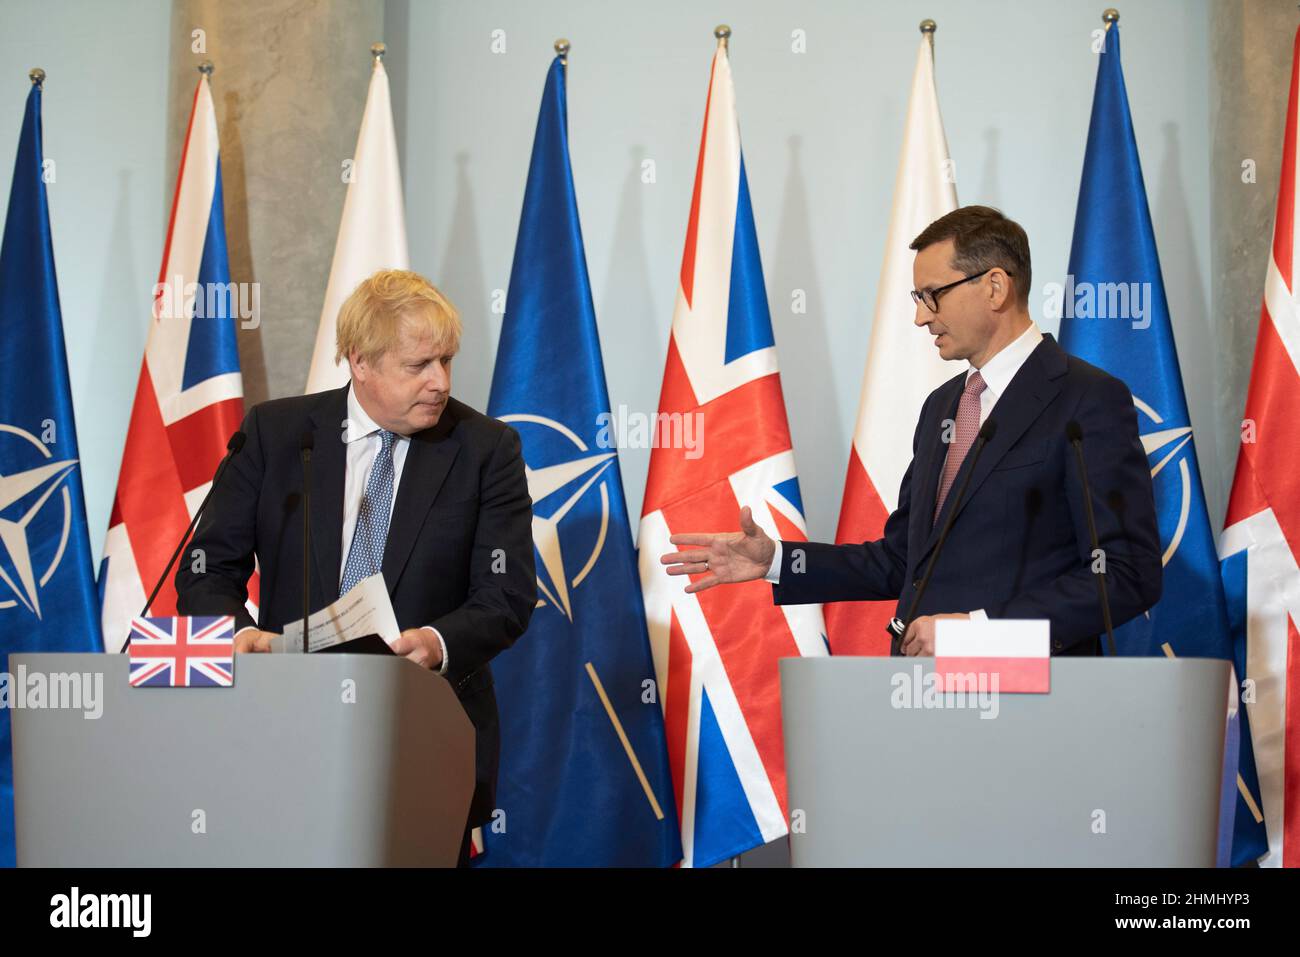 Warsaw, Warsaw, Poland. 10th Feb, 2022. Polish Prime Minister MATEUSZ MORAWIECKI (R) and the British Prime Minister BORIS JOHNSON (L) shake hands after a press conference at the chancellery of the Prime Minister of Poland on February 10, 2022 in Warsaw, Poland. The British Prime Minister Borish Johnson met Polish Prime Minister Mateusz Morawiecki to discuss about security in eastern Europe and Russian military build up on the border with Ukraine. Credit: ZUMA Press, Inc./Alamy Live News Stock Photo